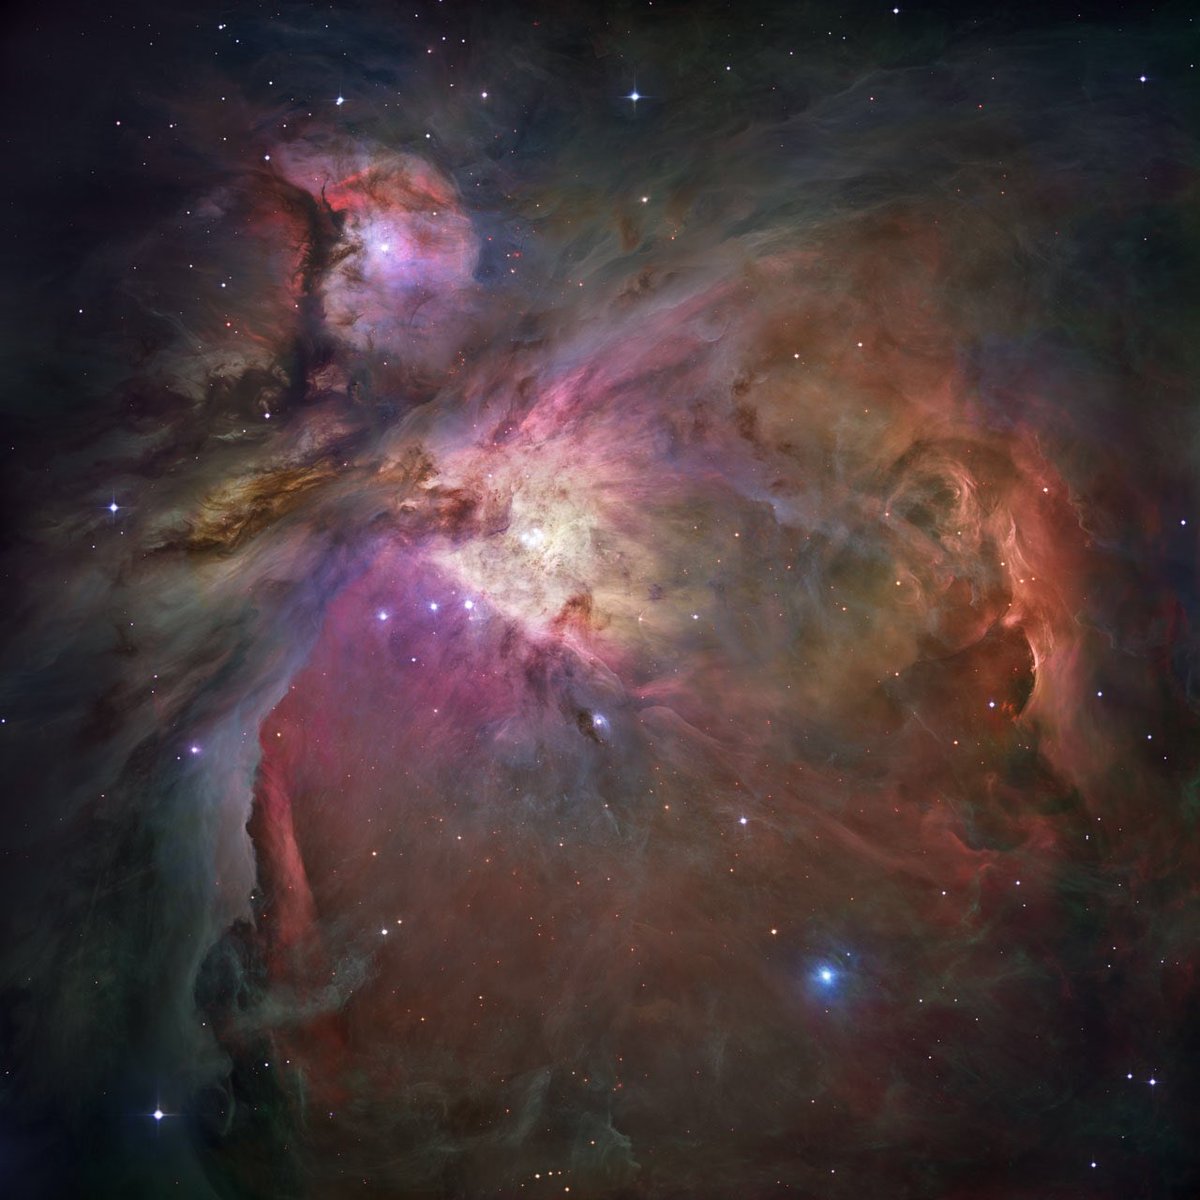 The Orion Nebula (M42) was the first deep sky object I found with my telescope when I was a kid.Image: NASA, ESA, M. Robberto ( Space Telescope Science Institute/ESA), Hubble Space Telescope Orion Treasury Project Team